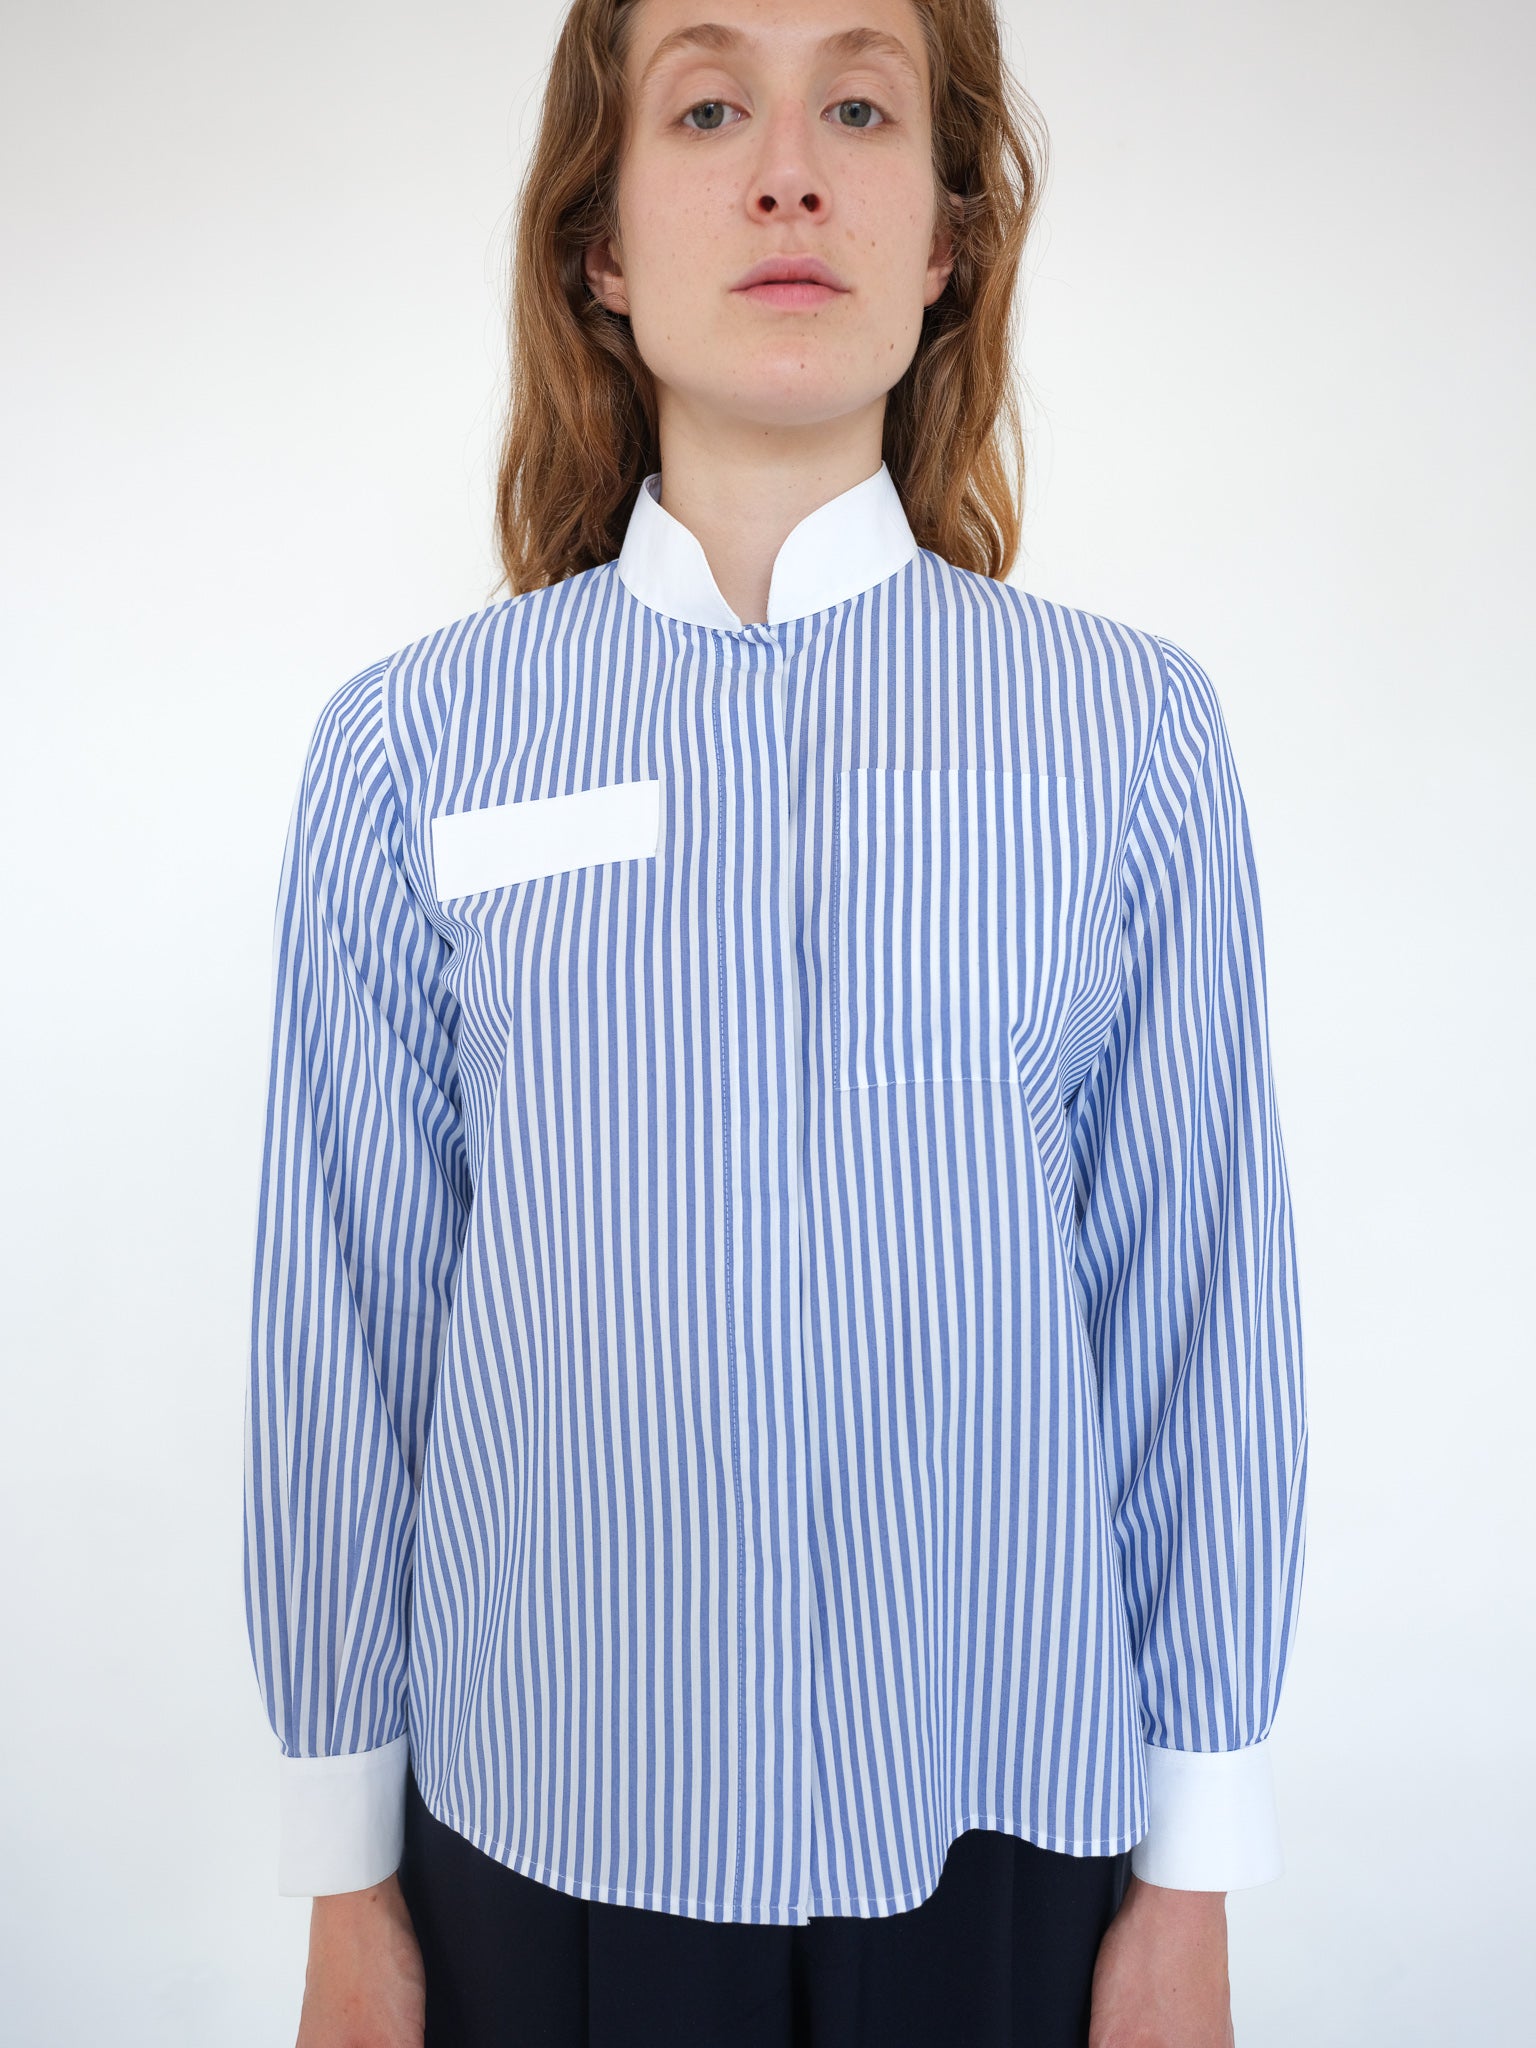 Carven for Air France blouse